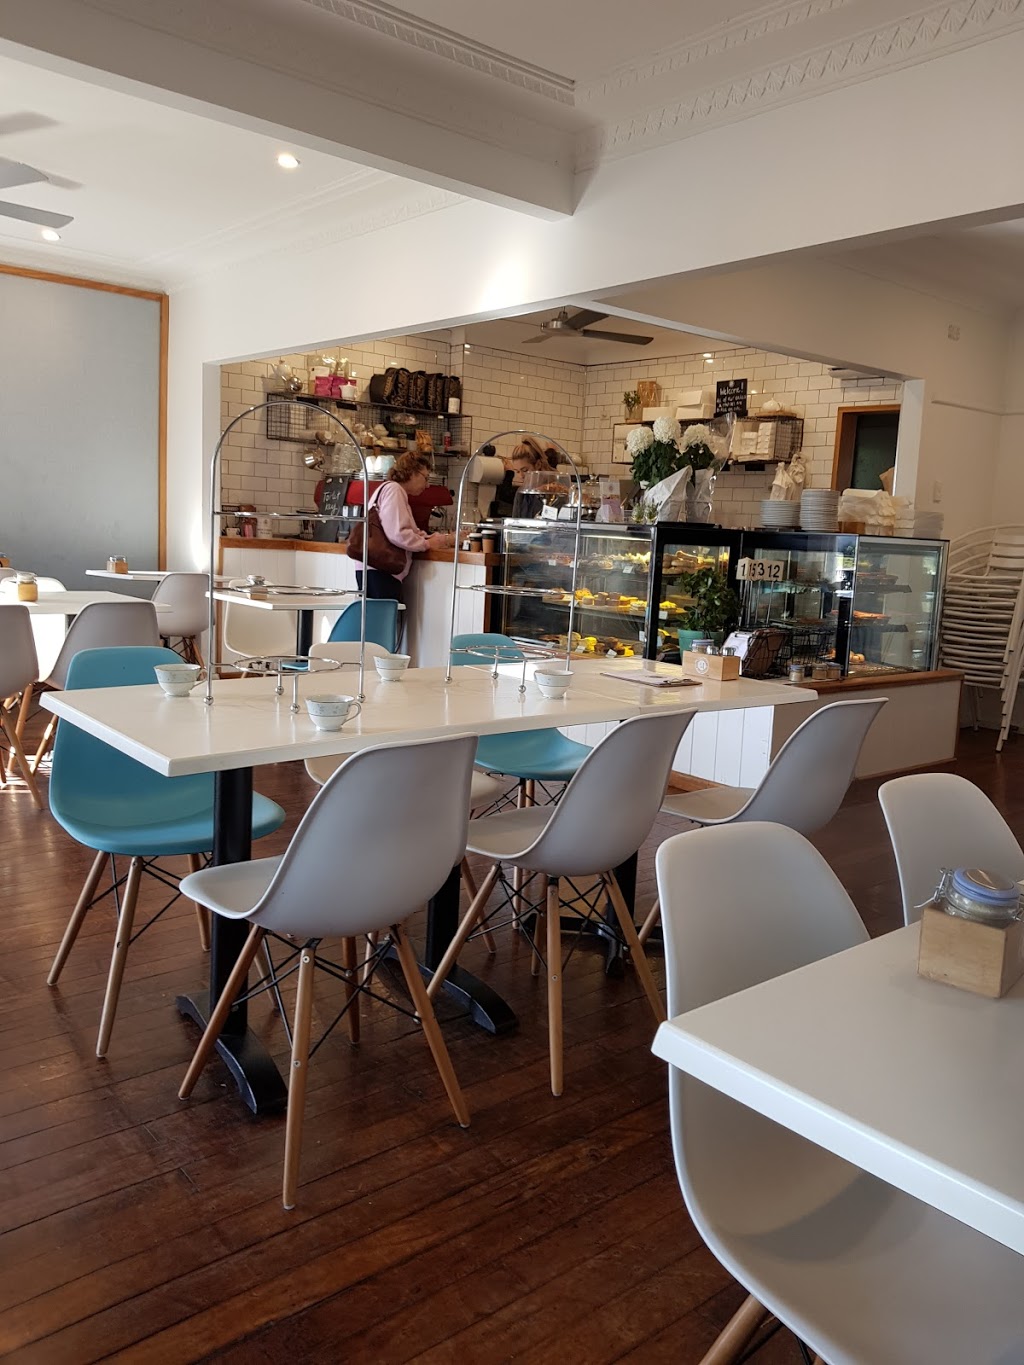 Cobbitty Bakehouse | cafe | 300 Cobbitty Rd, Cobbitty NSW 2570, Australia | 0414188524 OR +61 414 188 524